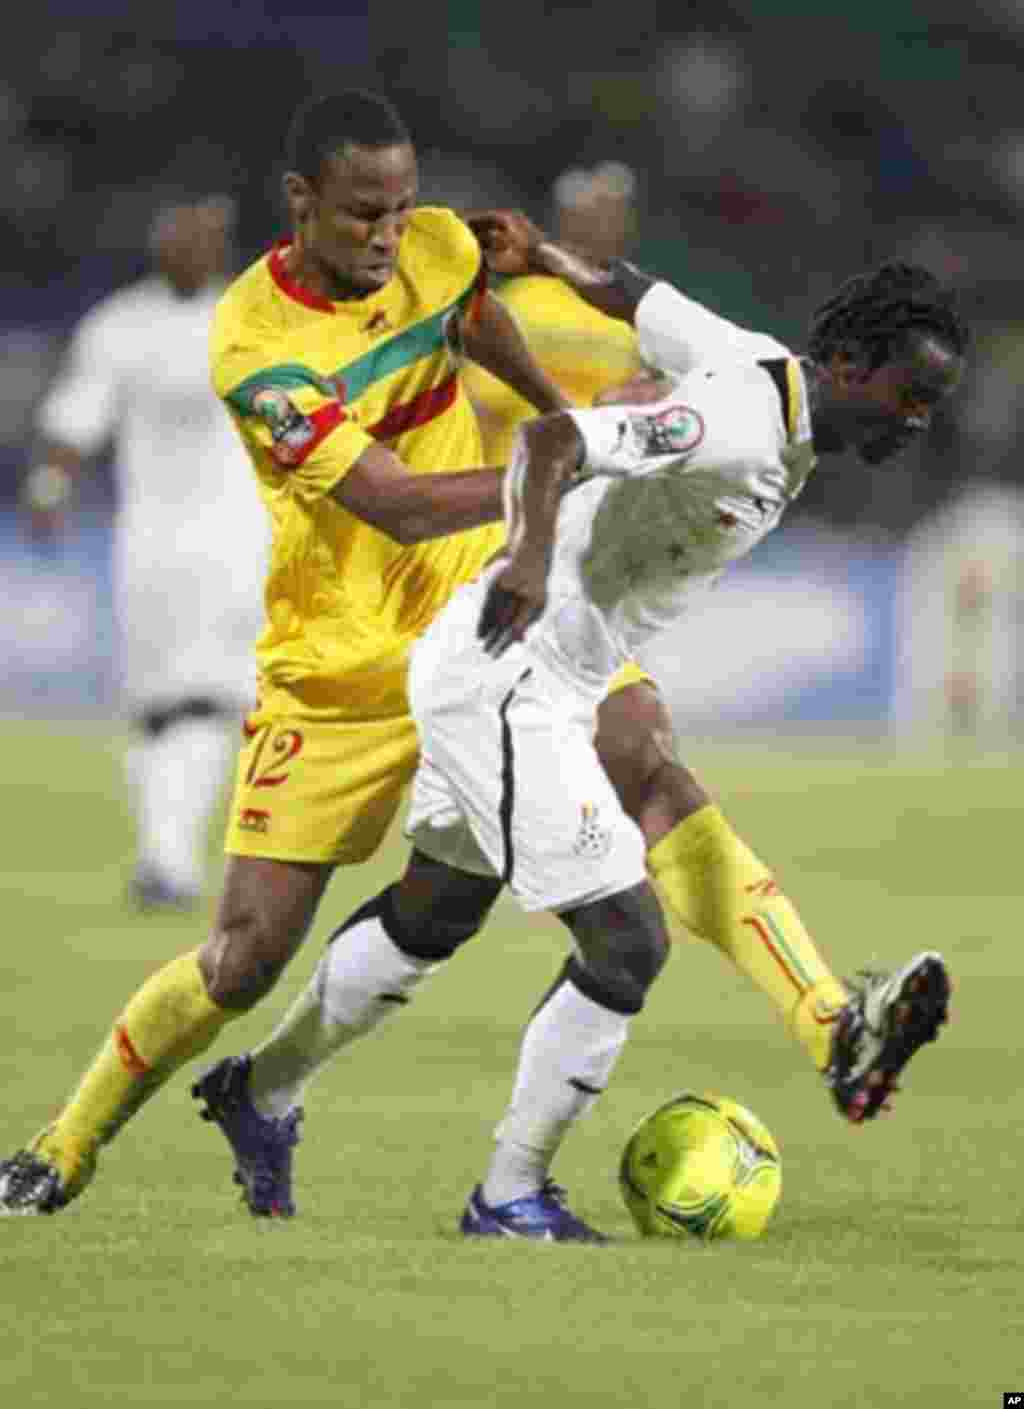 Ghana's Annan Anthony (R) challenges Kaita Seydou of Mali during their African Cup of Nations Group D soccer match in FranceVille Stadium January 28, 2012.